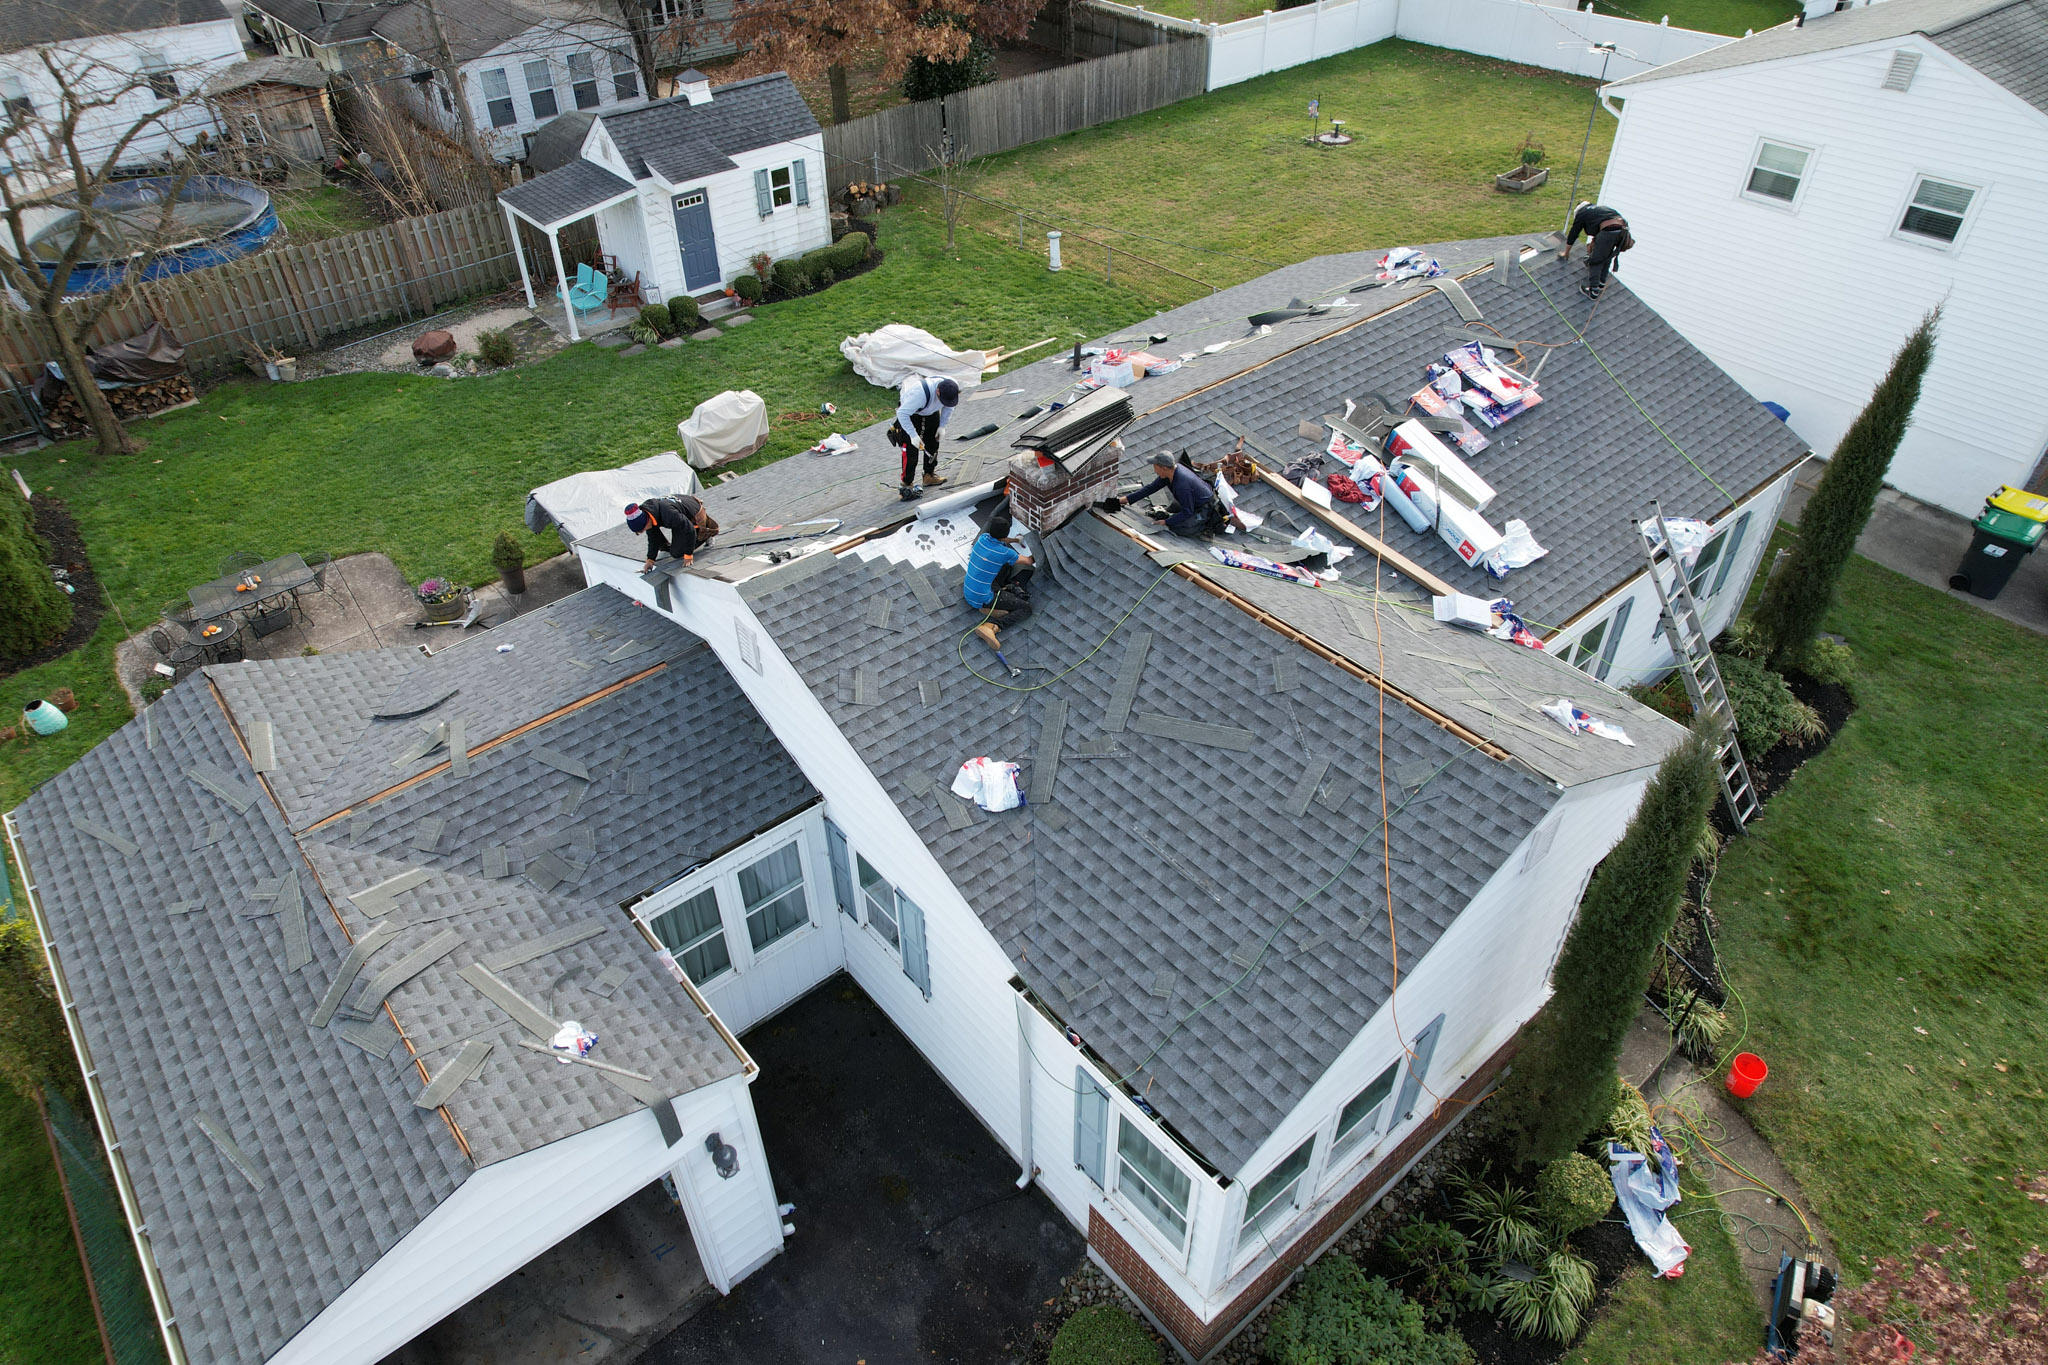 Class Roofing contractors repairing a roof